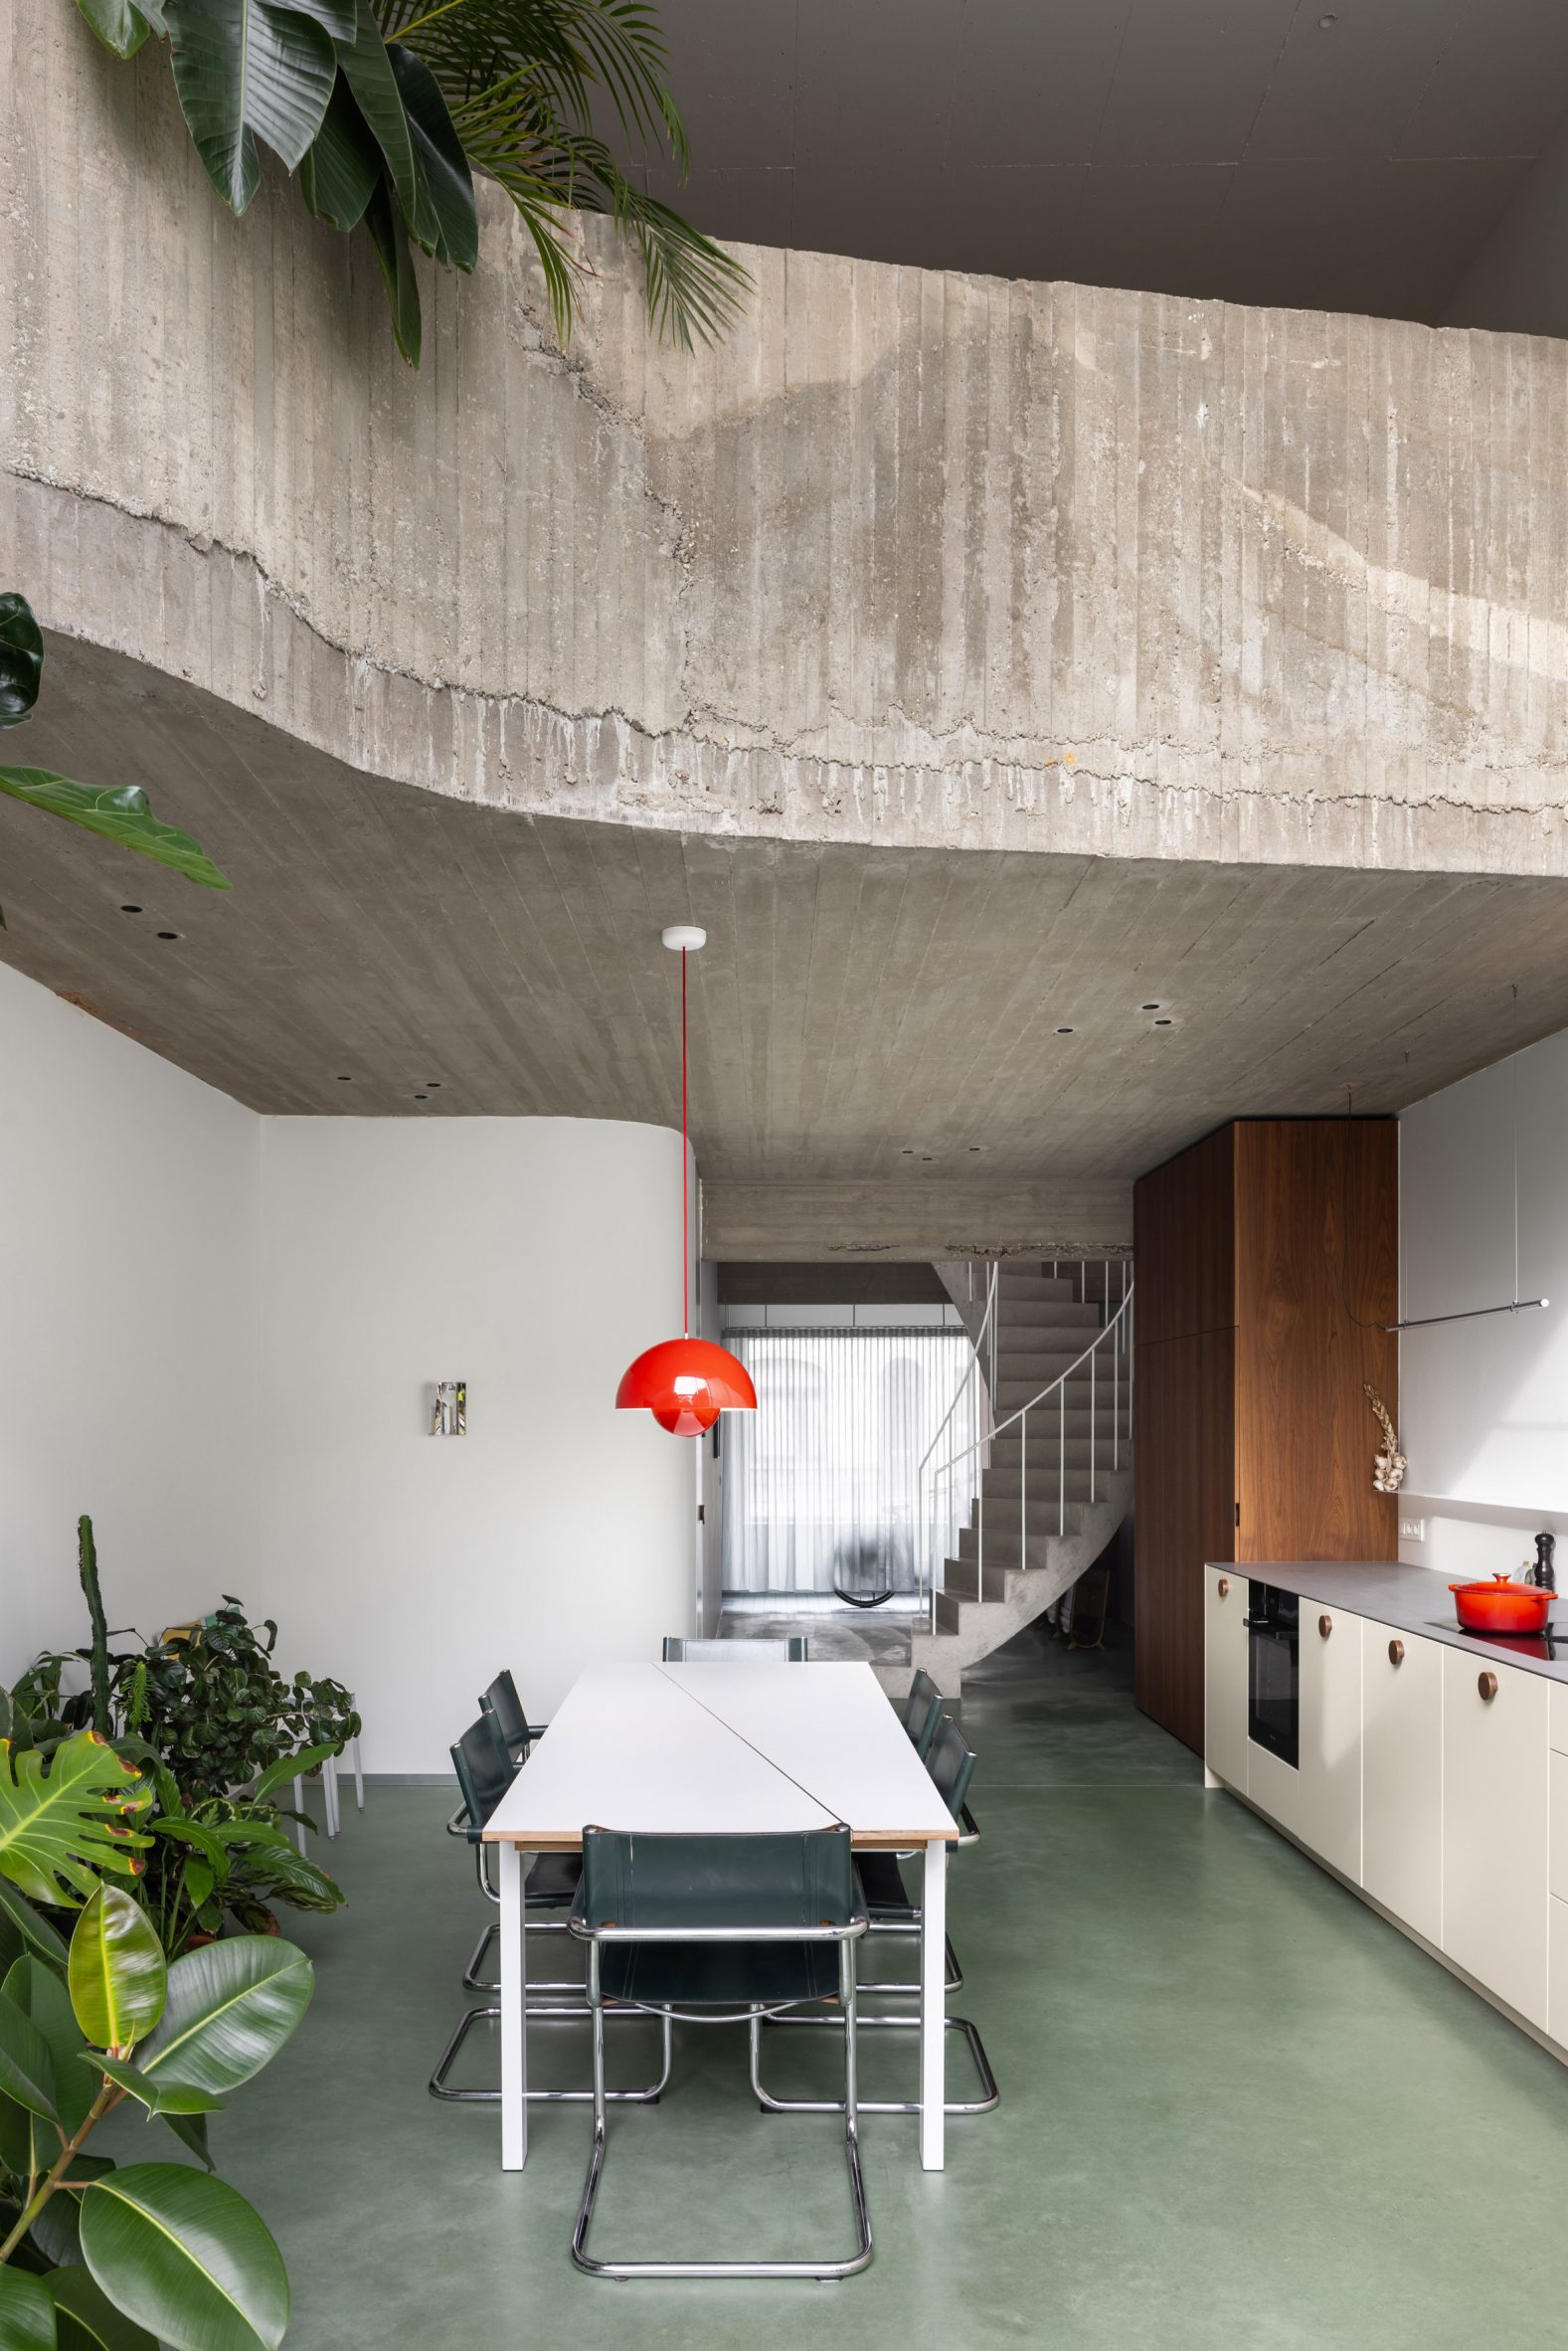 Interior view of Well by Memo Architectuur